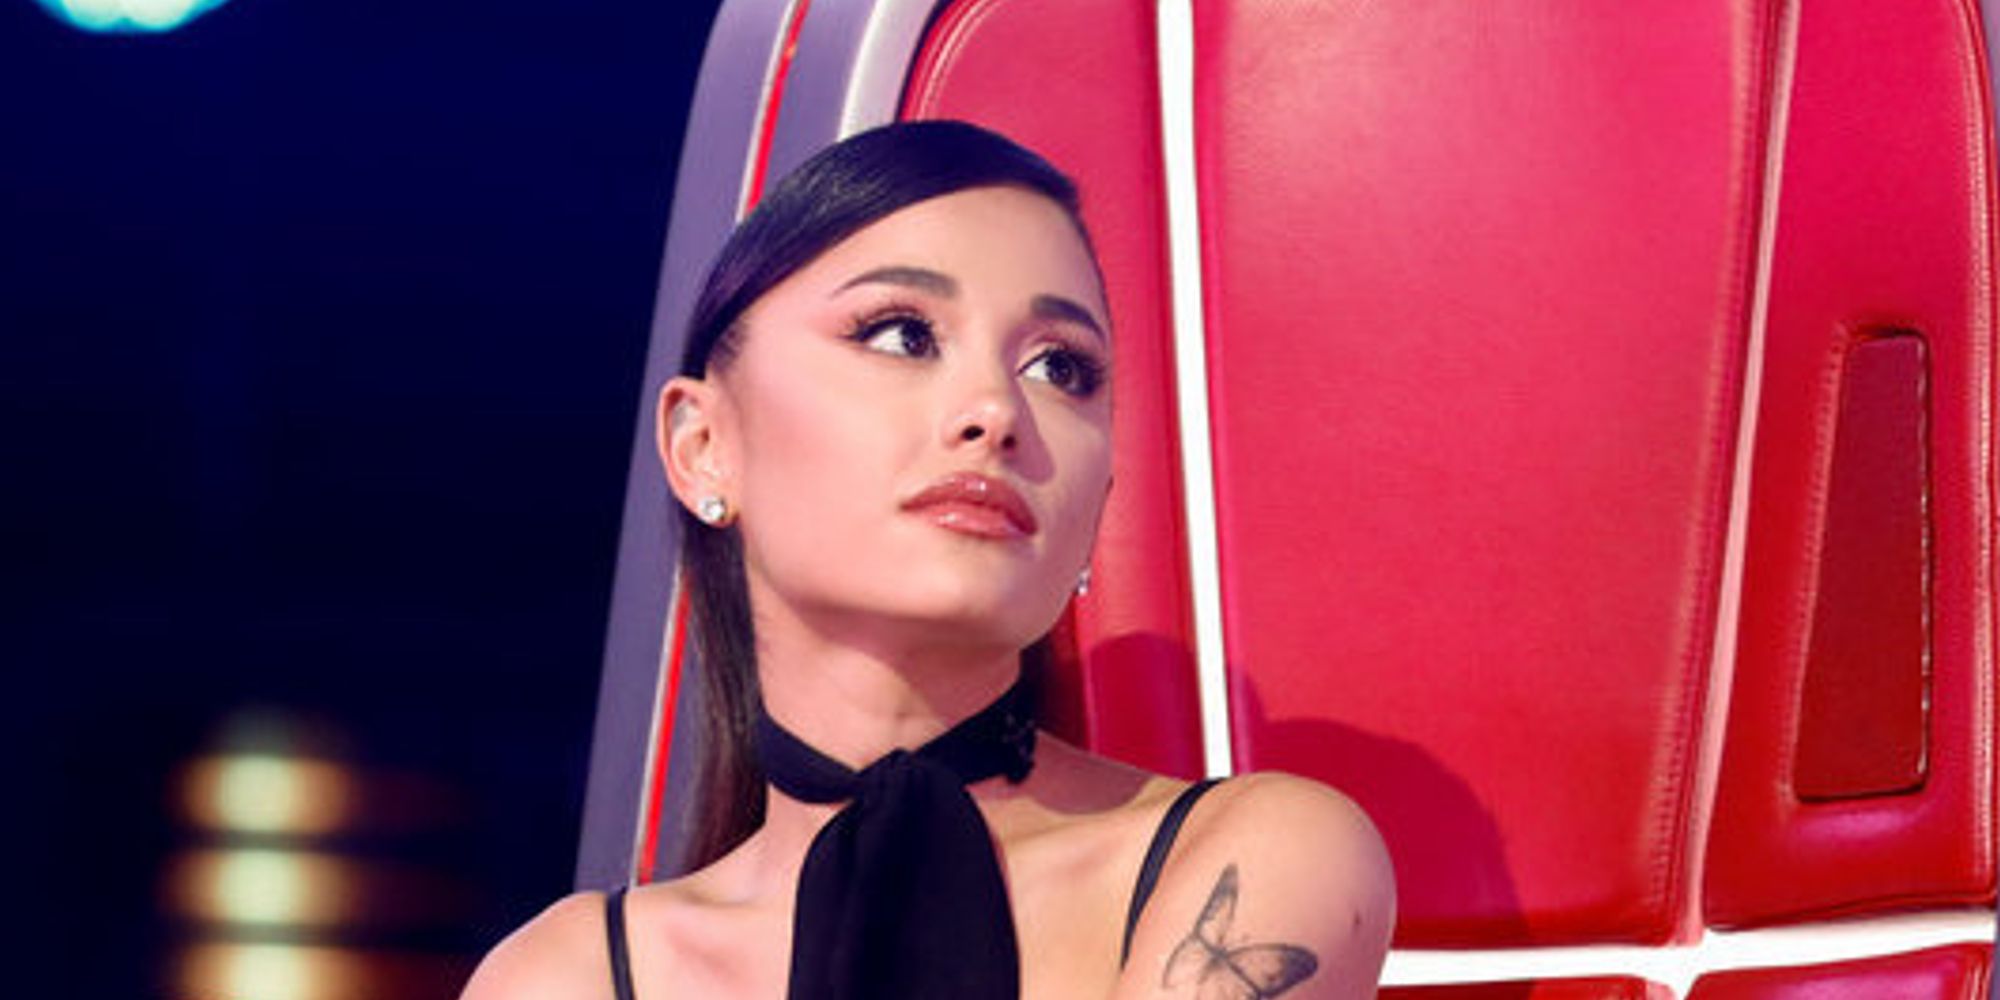 Ariana Grande on The Voice season 21 sitting on red chair